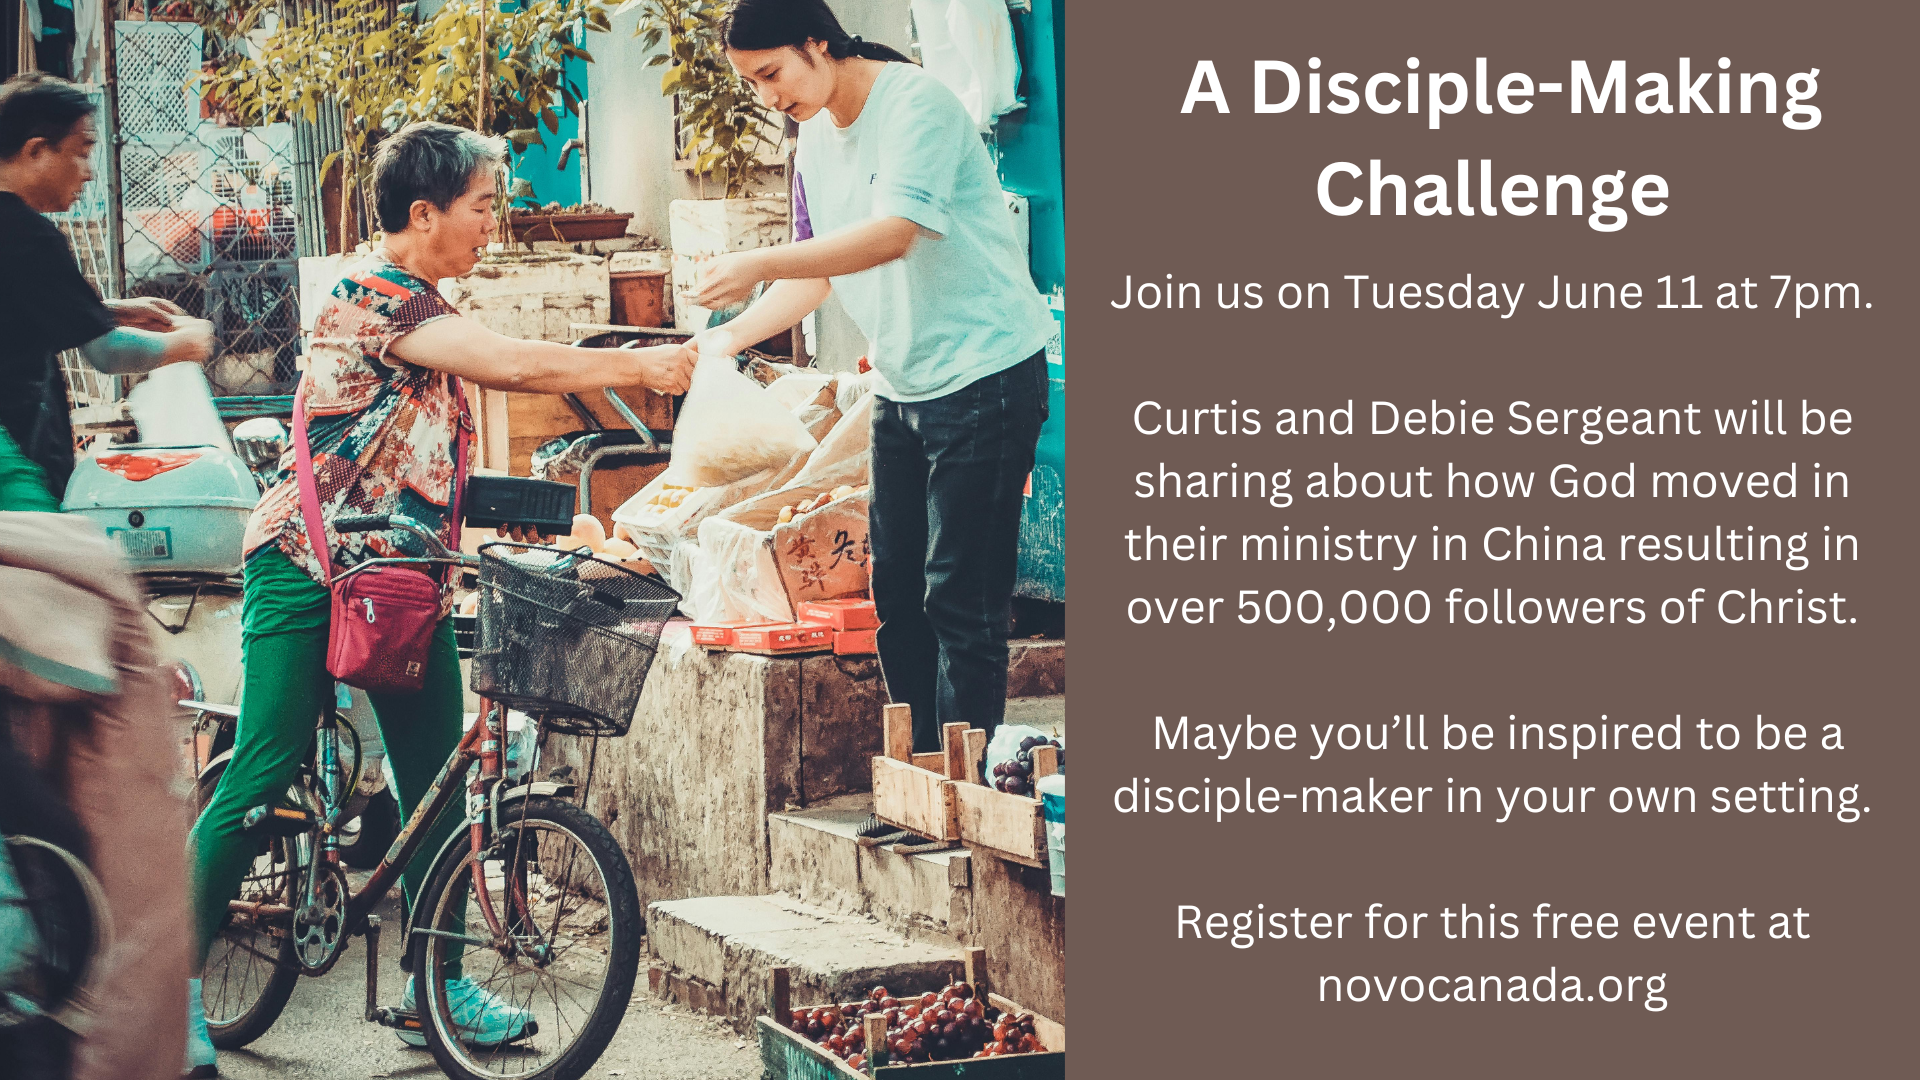 A Disciple-Making Challenge